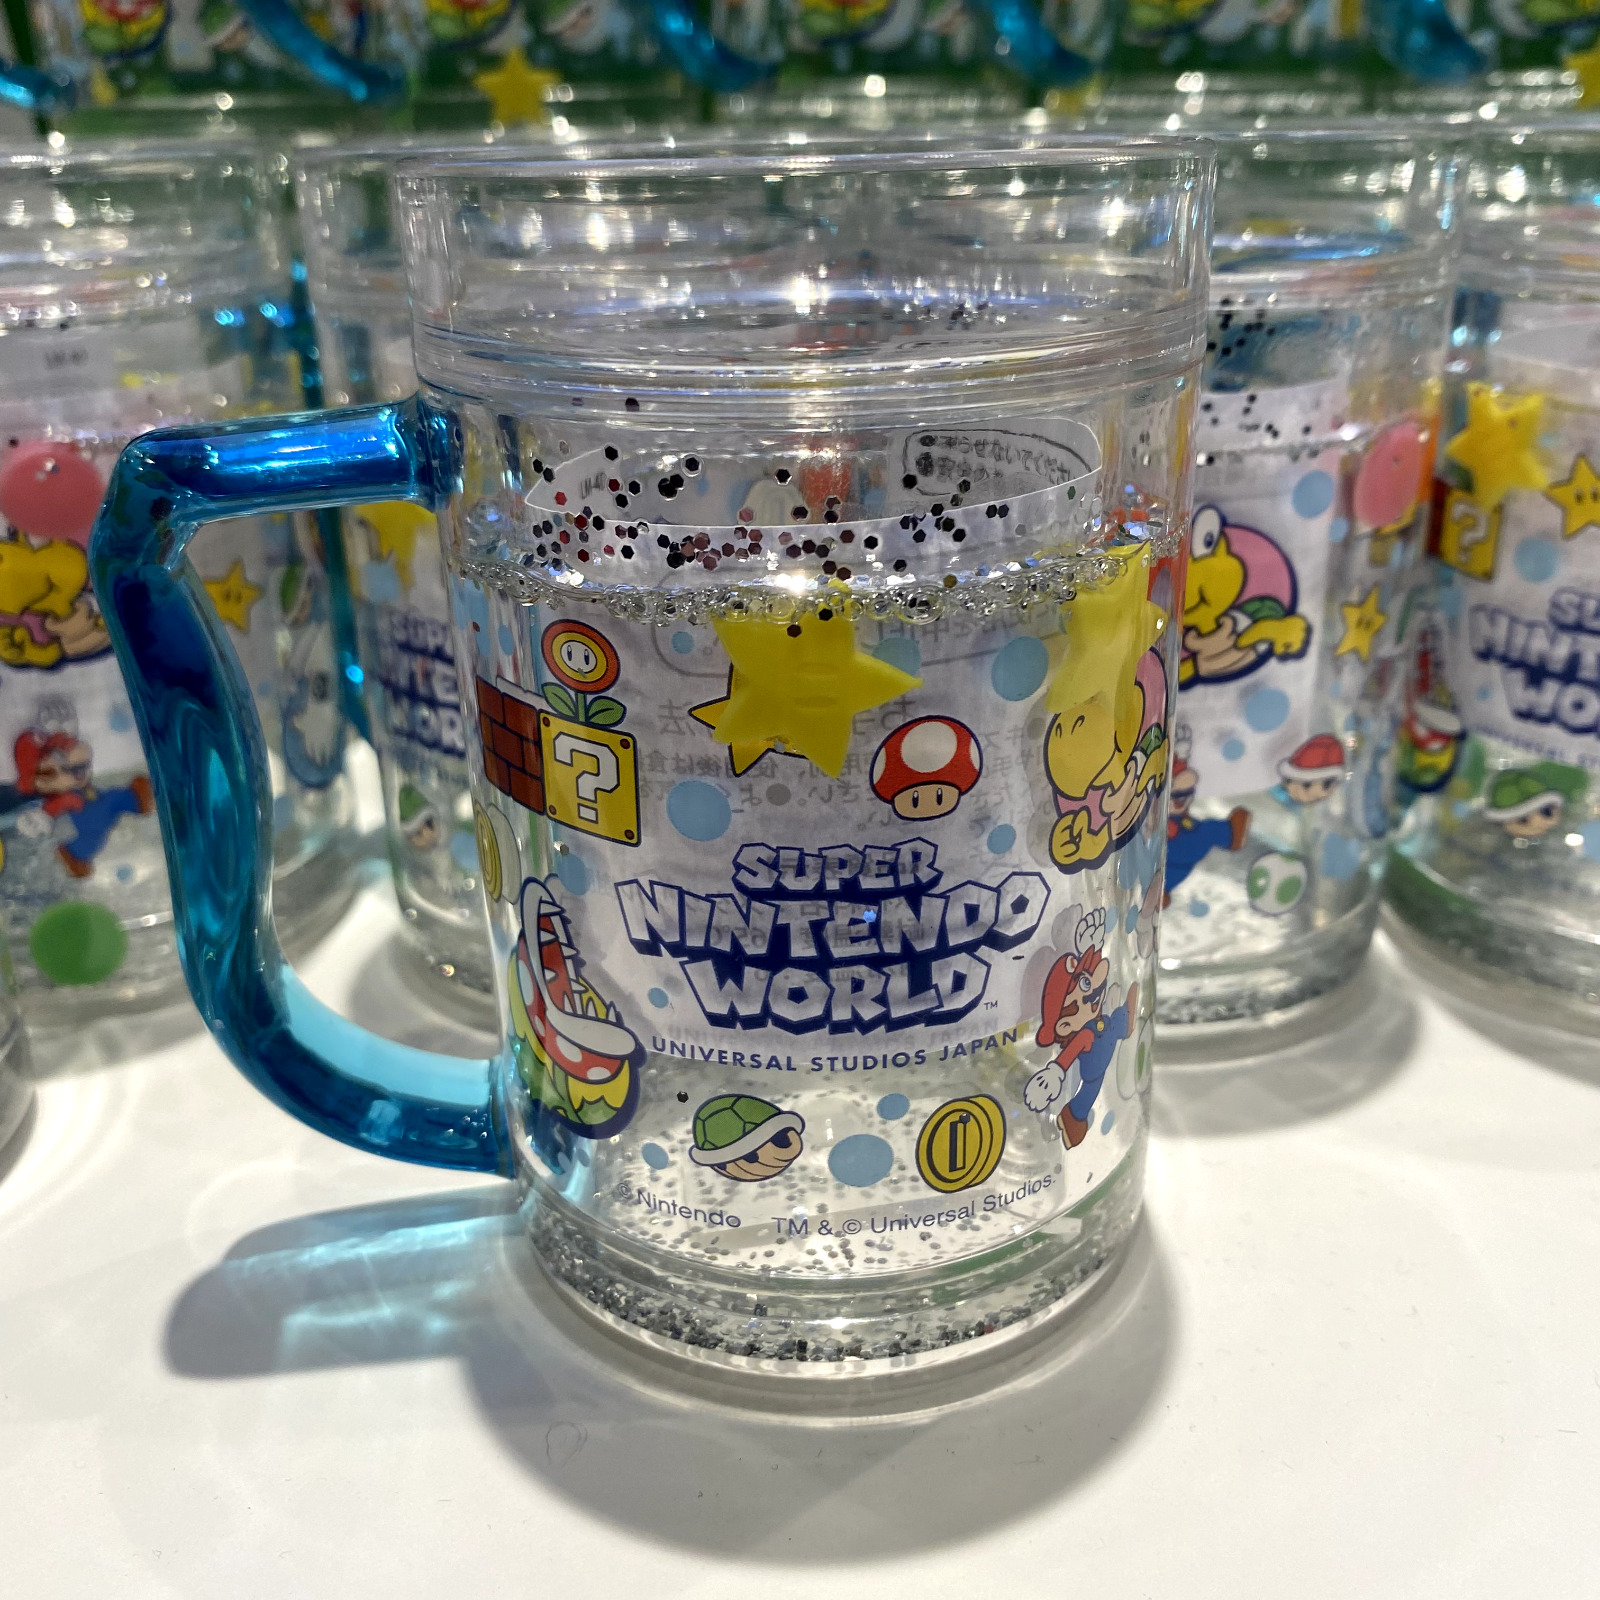 Super Nintendo World limited new release Colorful Cup USJ Super Mario Bros. New